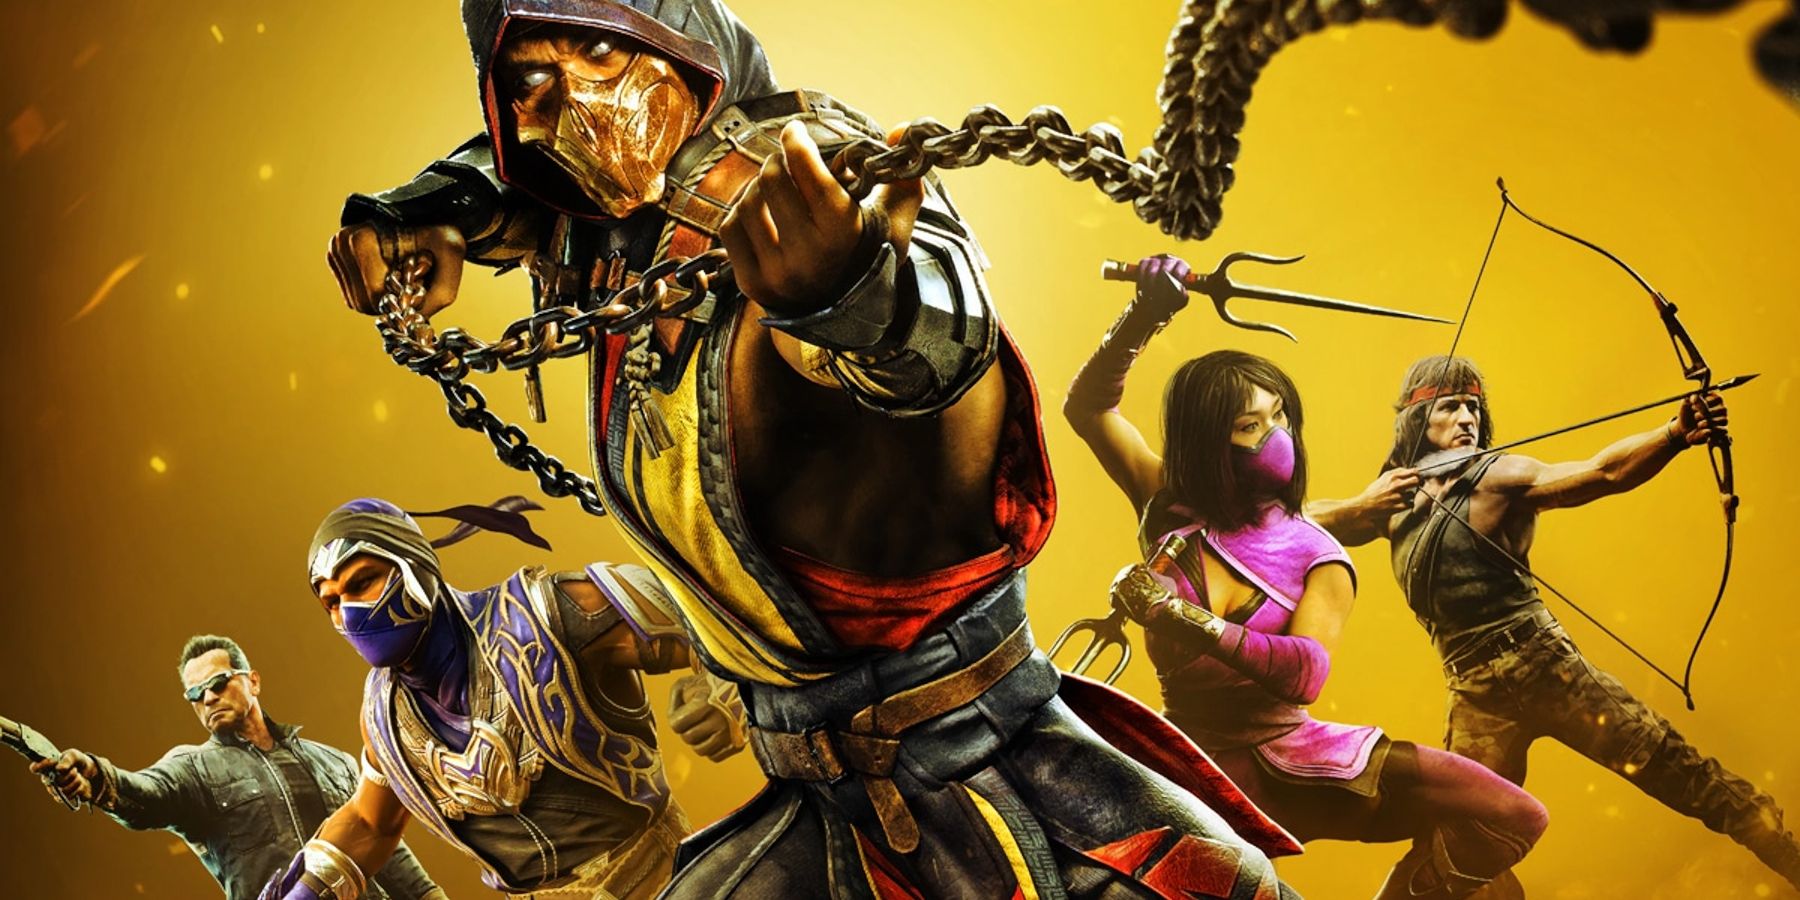 Ed Boon: Mortal Kombat will remain online after GameSpy closure - Polygon